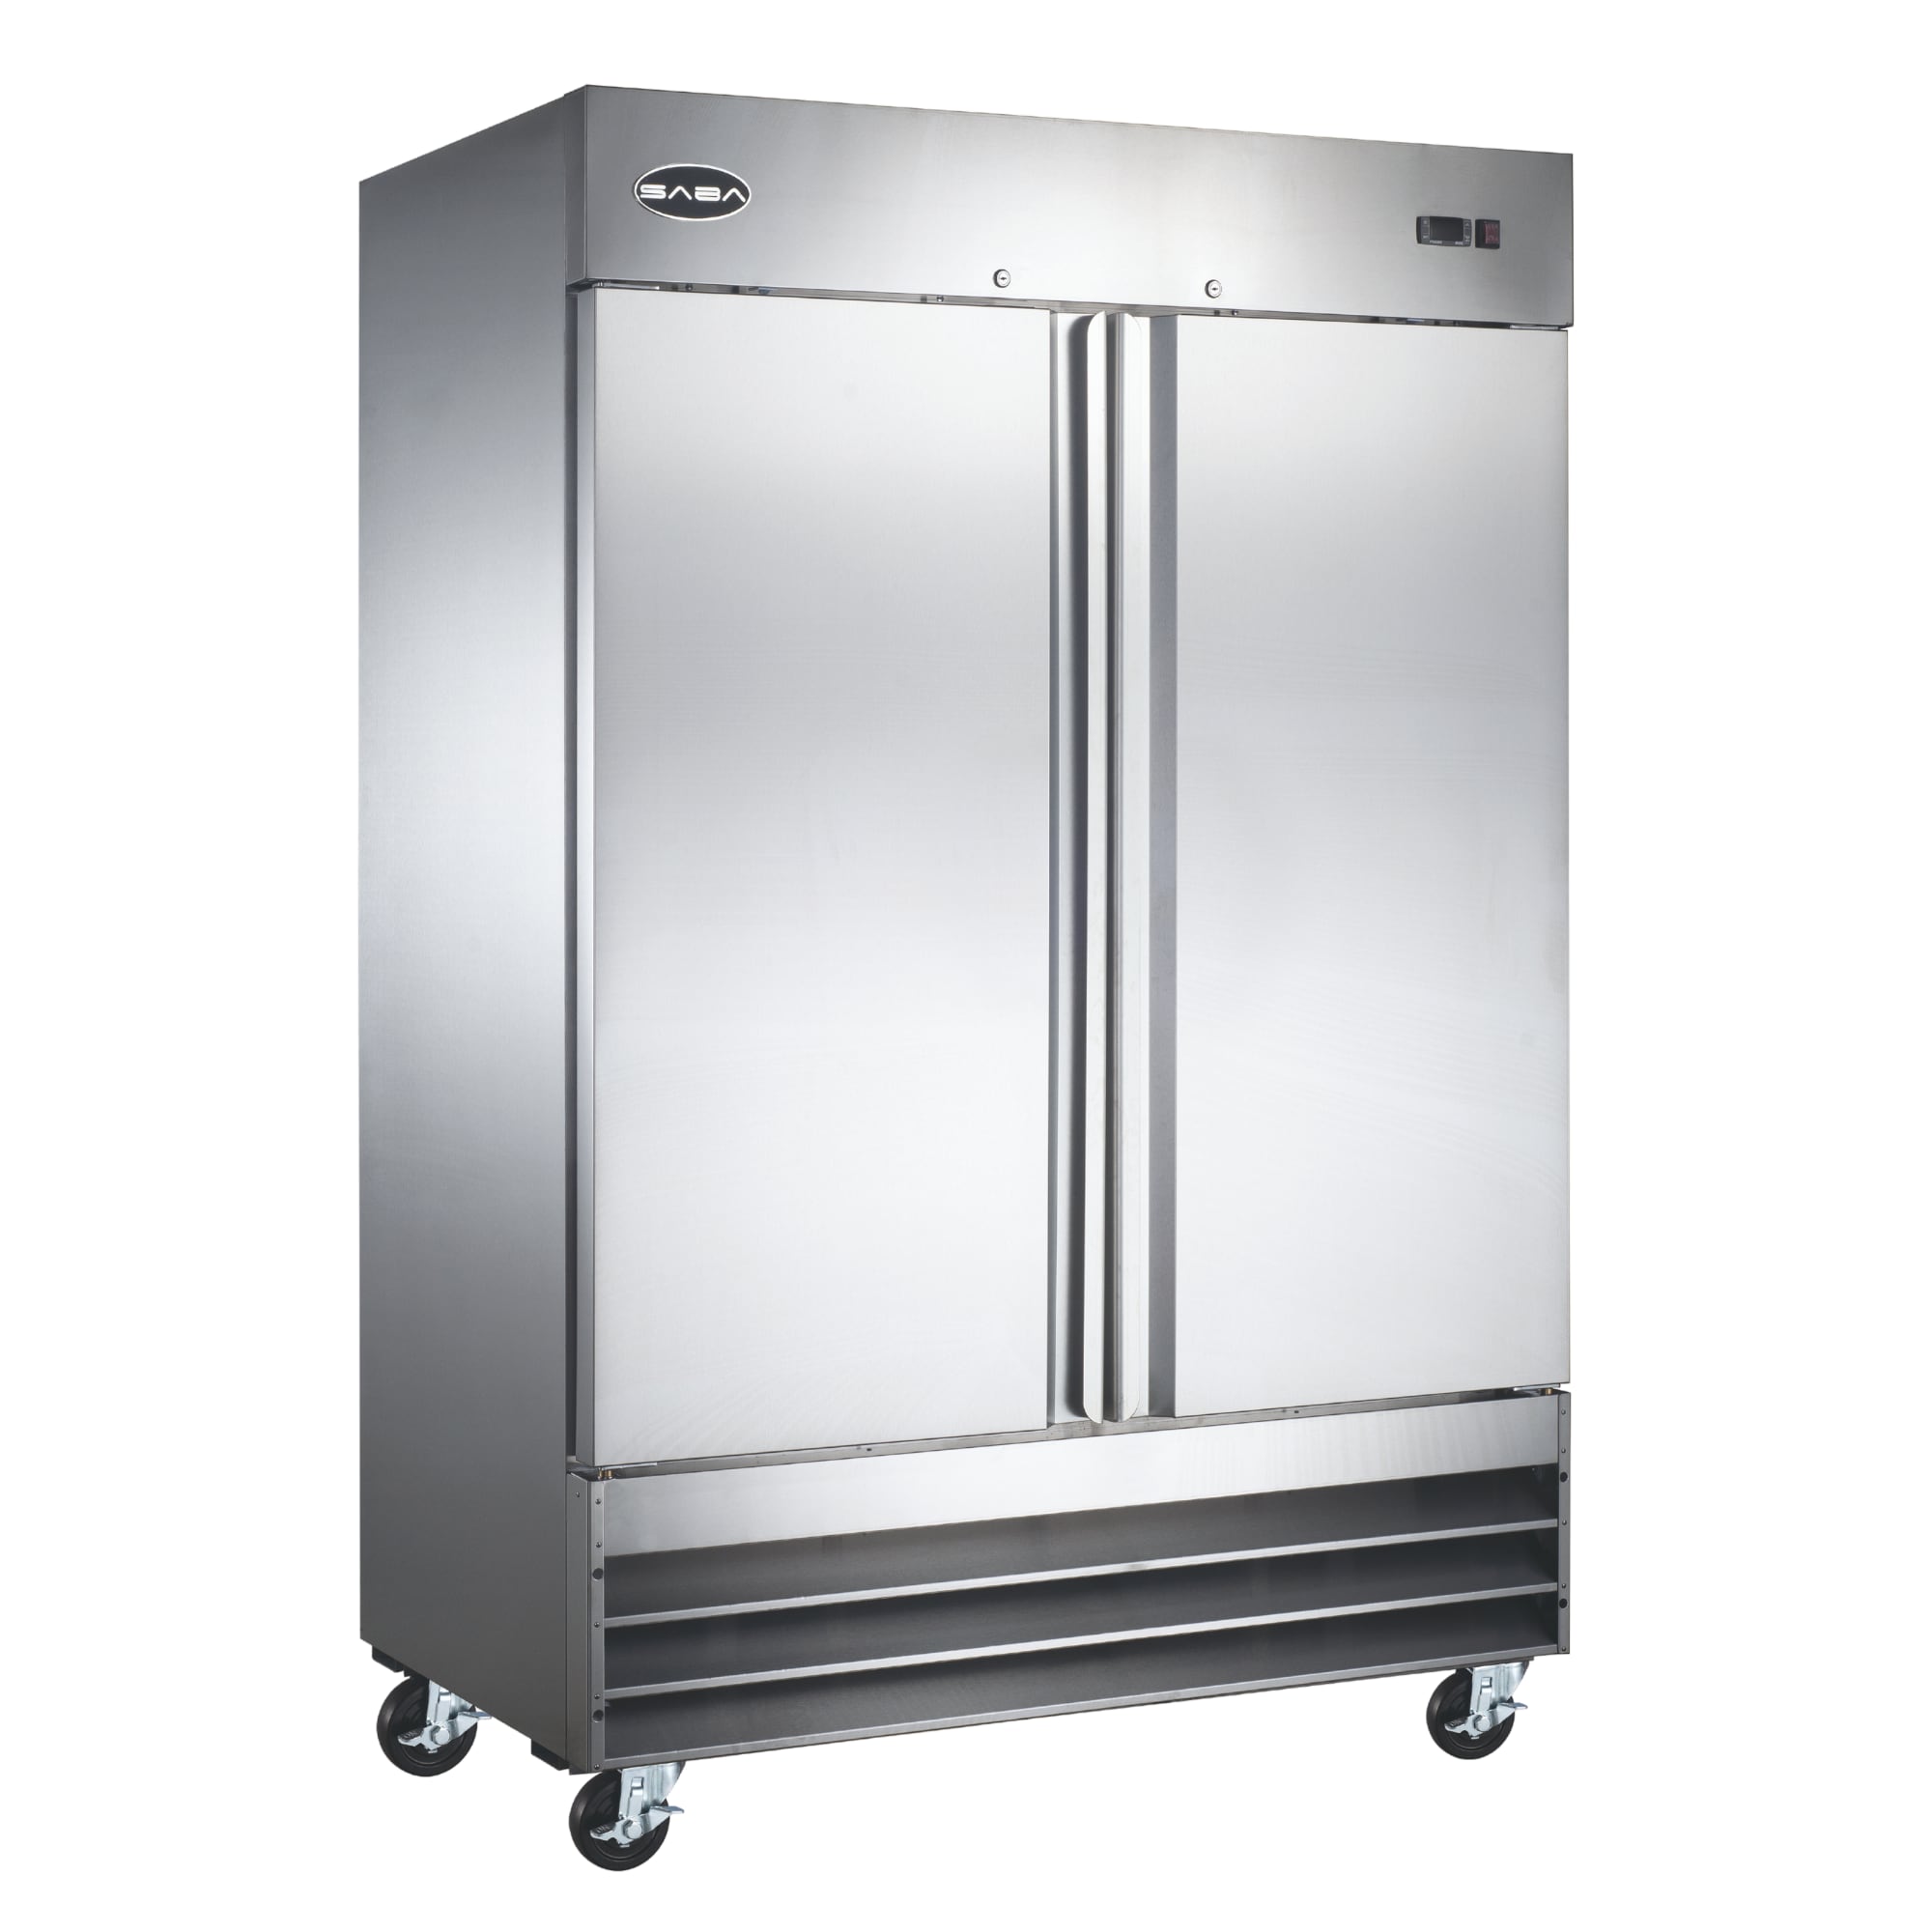 Saba 12 Cu. ft. Commercial Under Counter Freezer in Stainless Steel, Silver